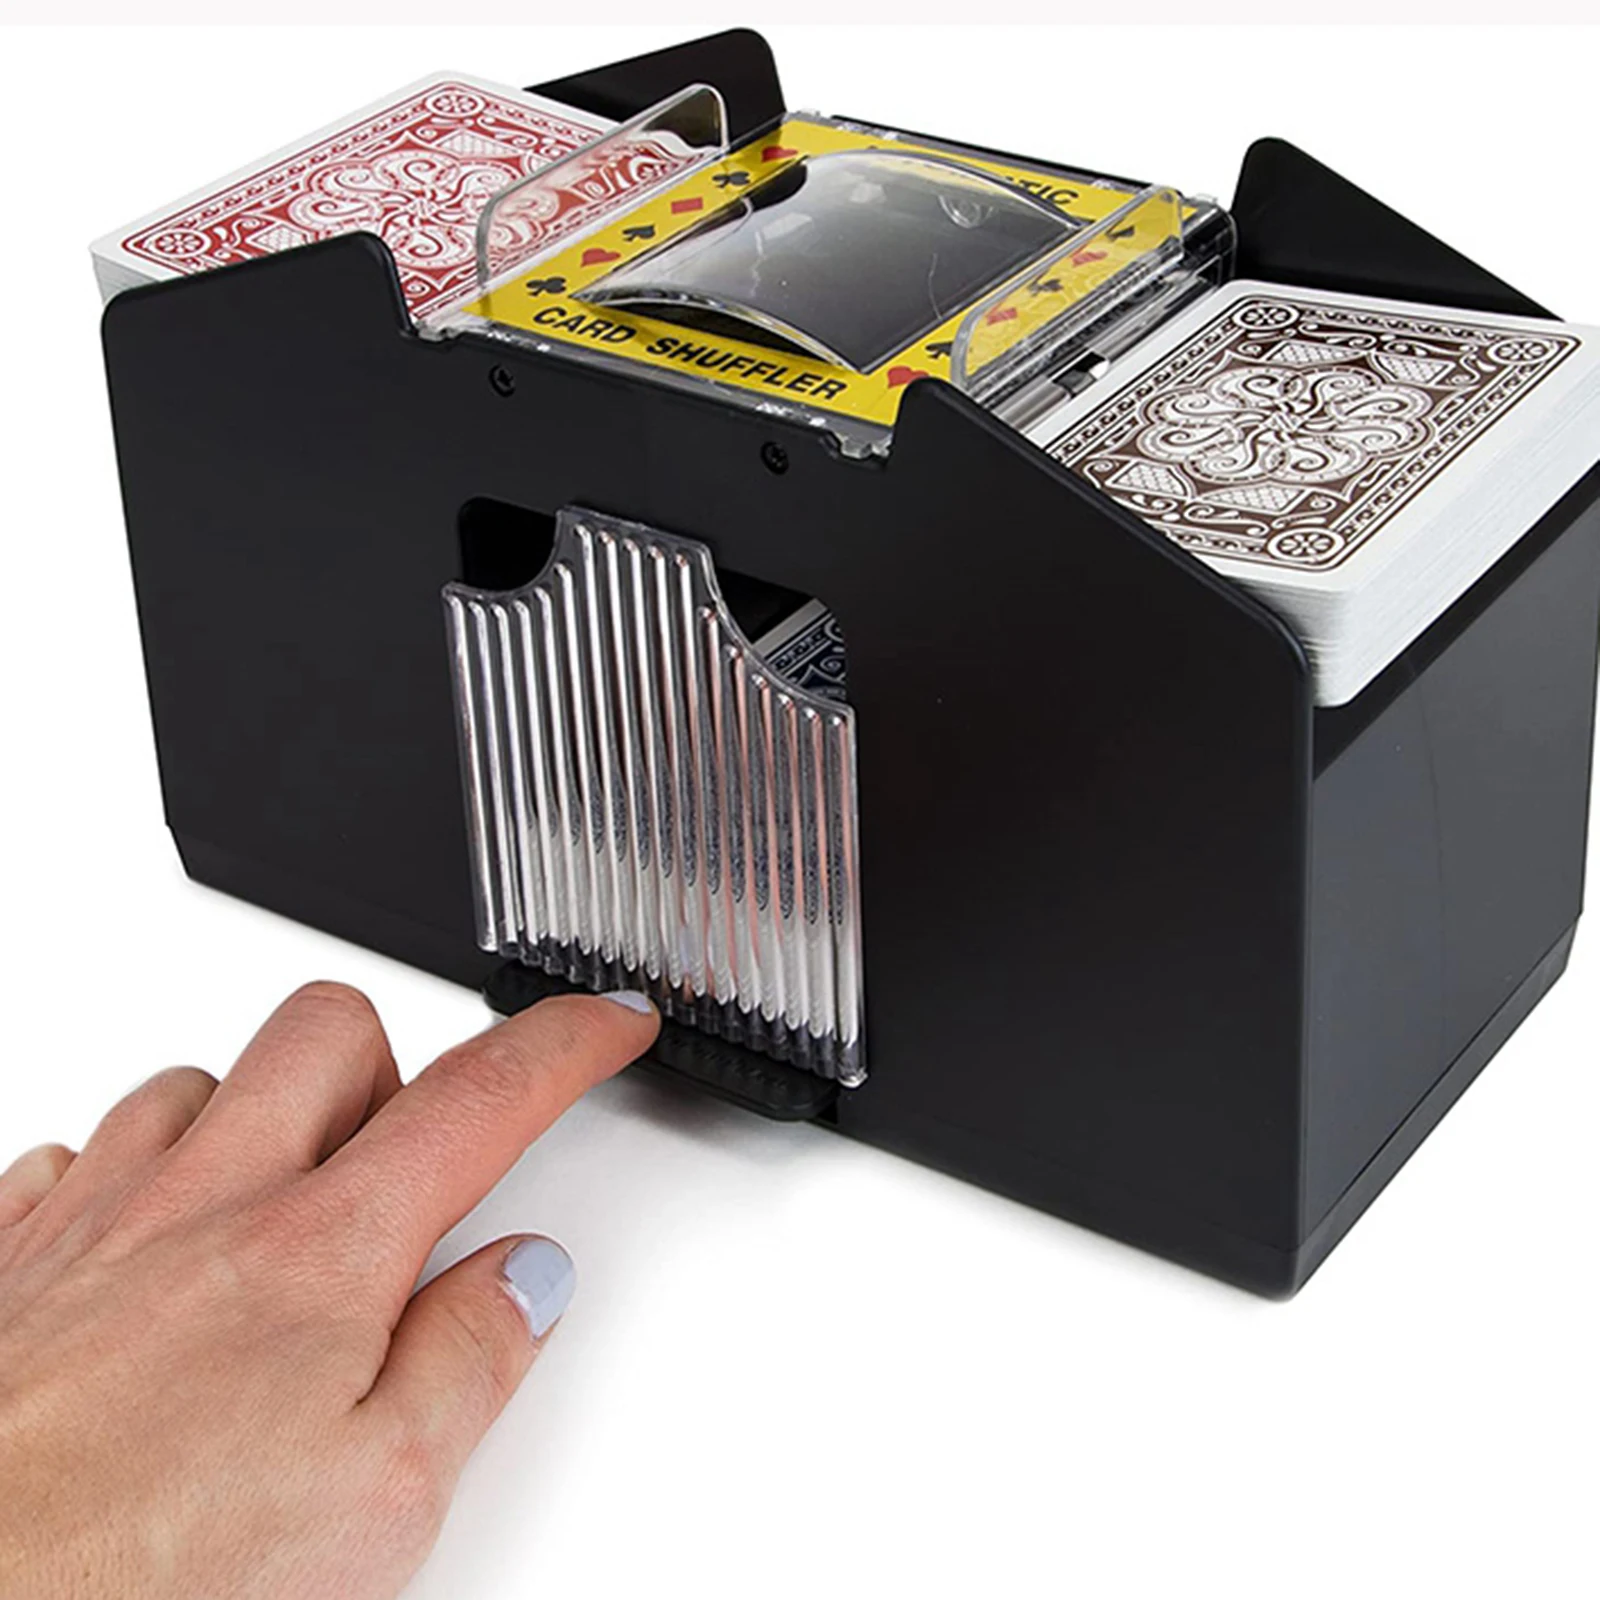 4-Deck Automatic Card Shuffler,Playing Card shuffler Quiet, Easy to Use,Battery Operated